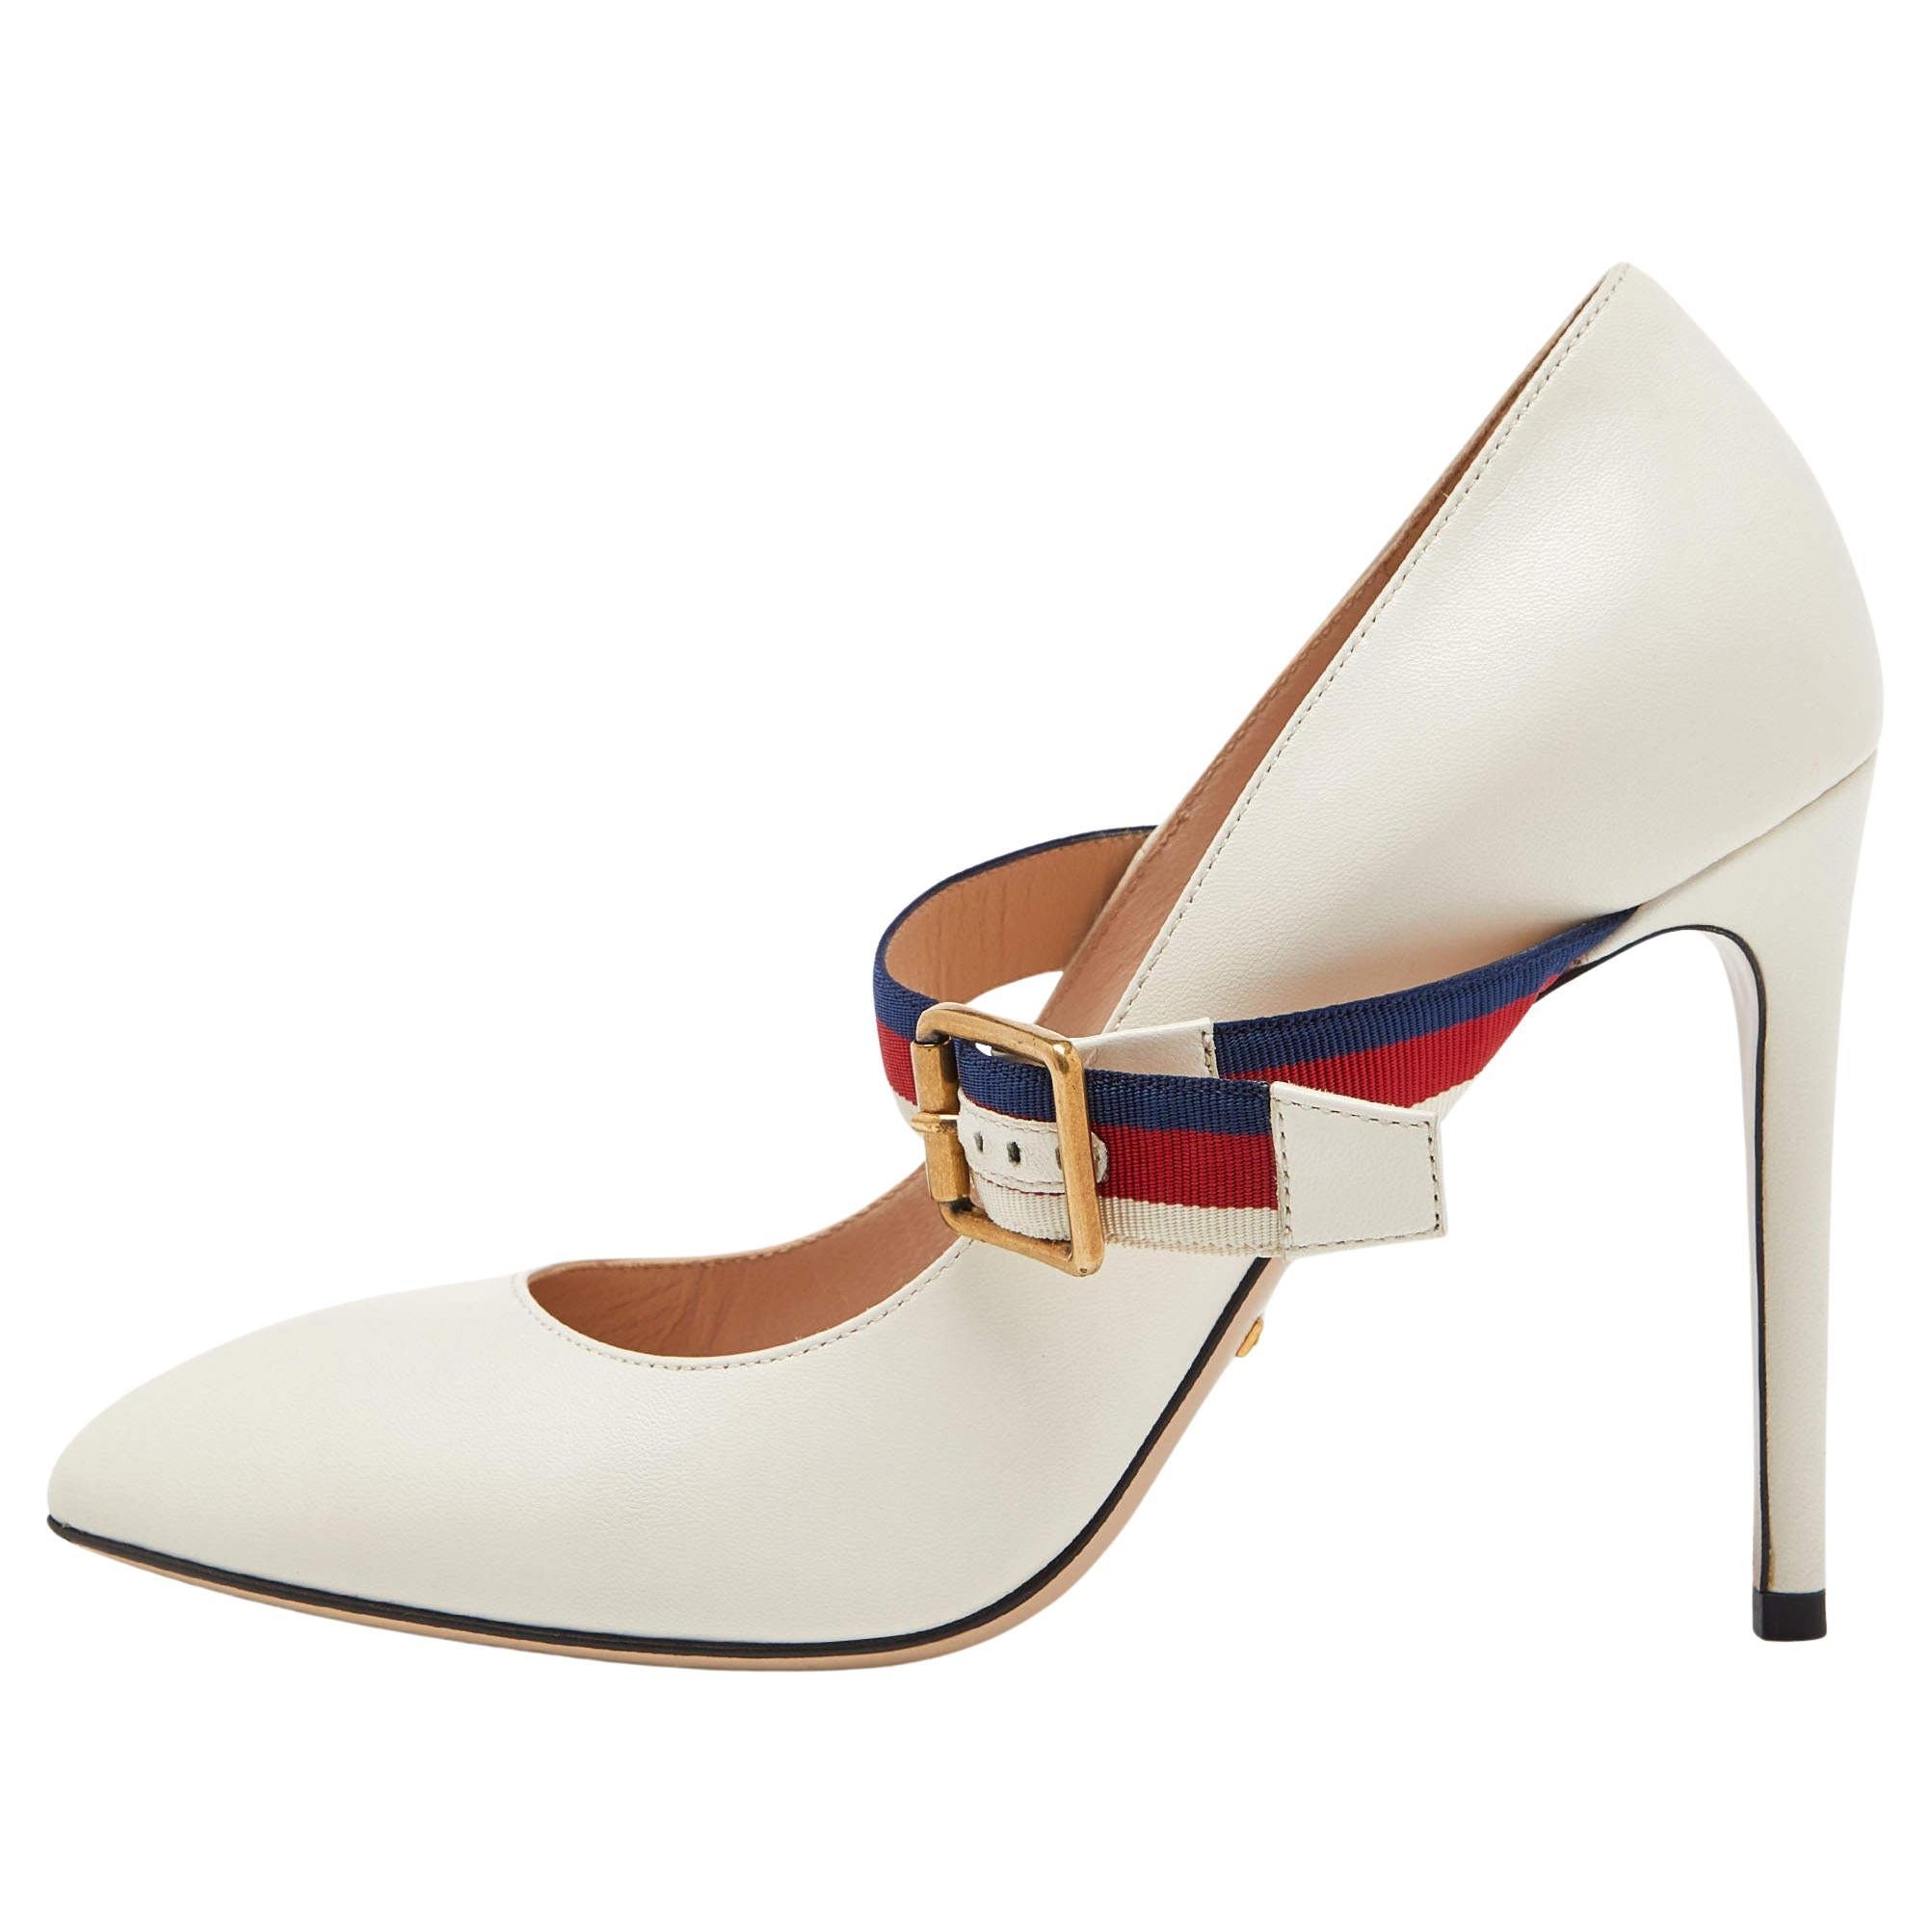 Gucci Cream Leather Sylvie Mary Jane Pumps Size 38.5 For Sale